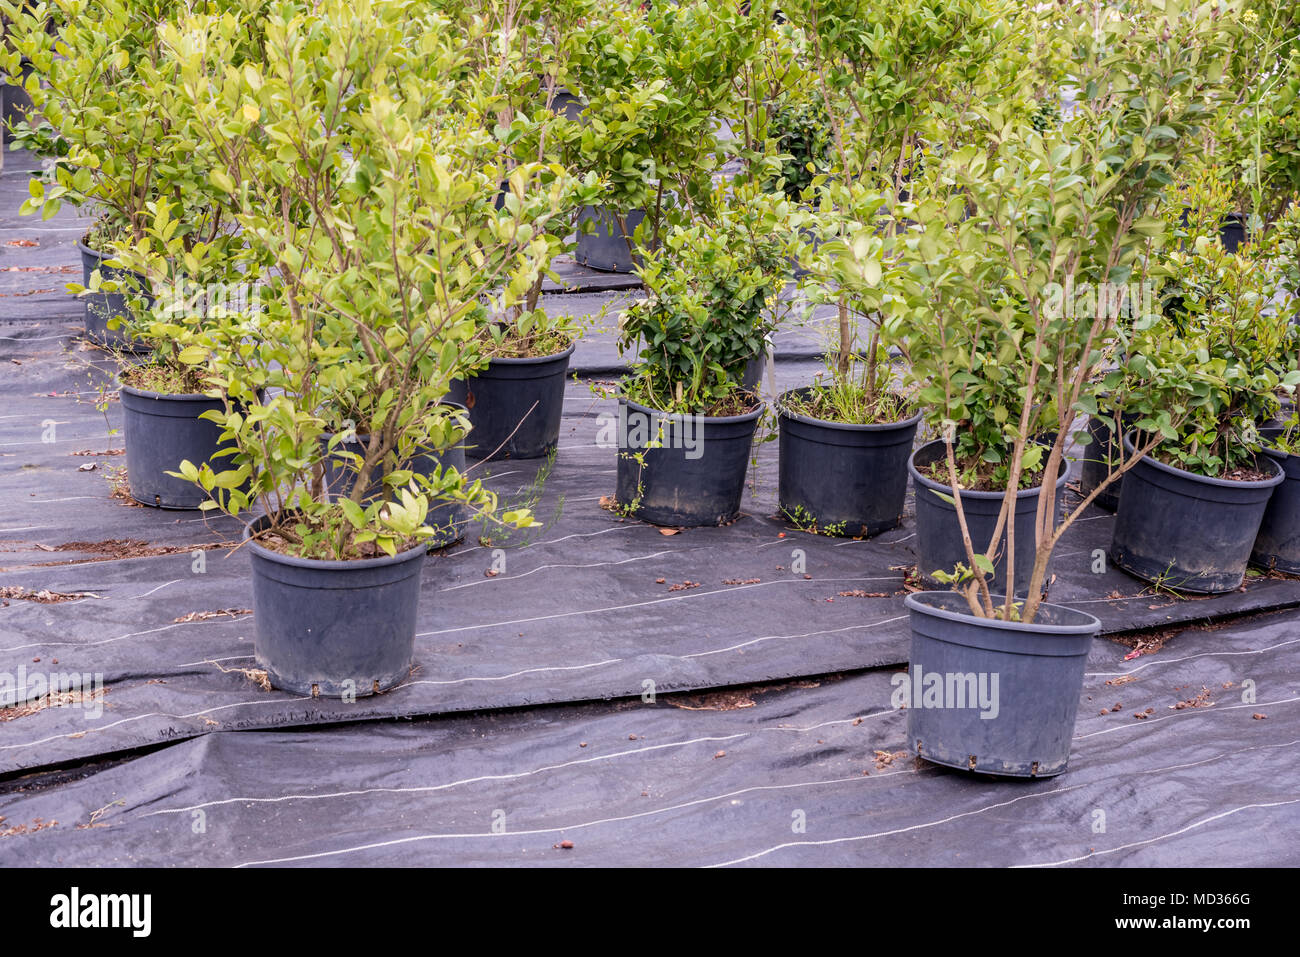 Top view of different potted plants and seedlings blooming in natural garden for sale Stock Photo